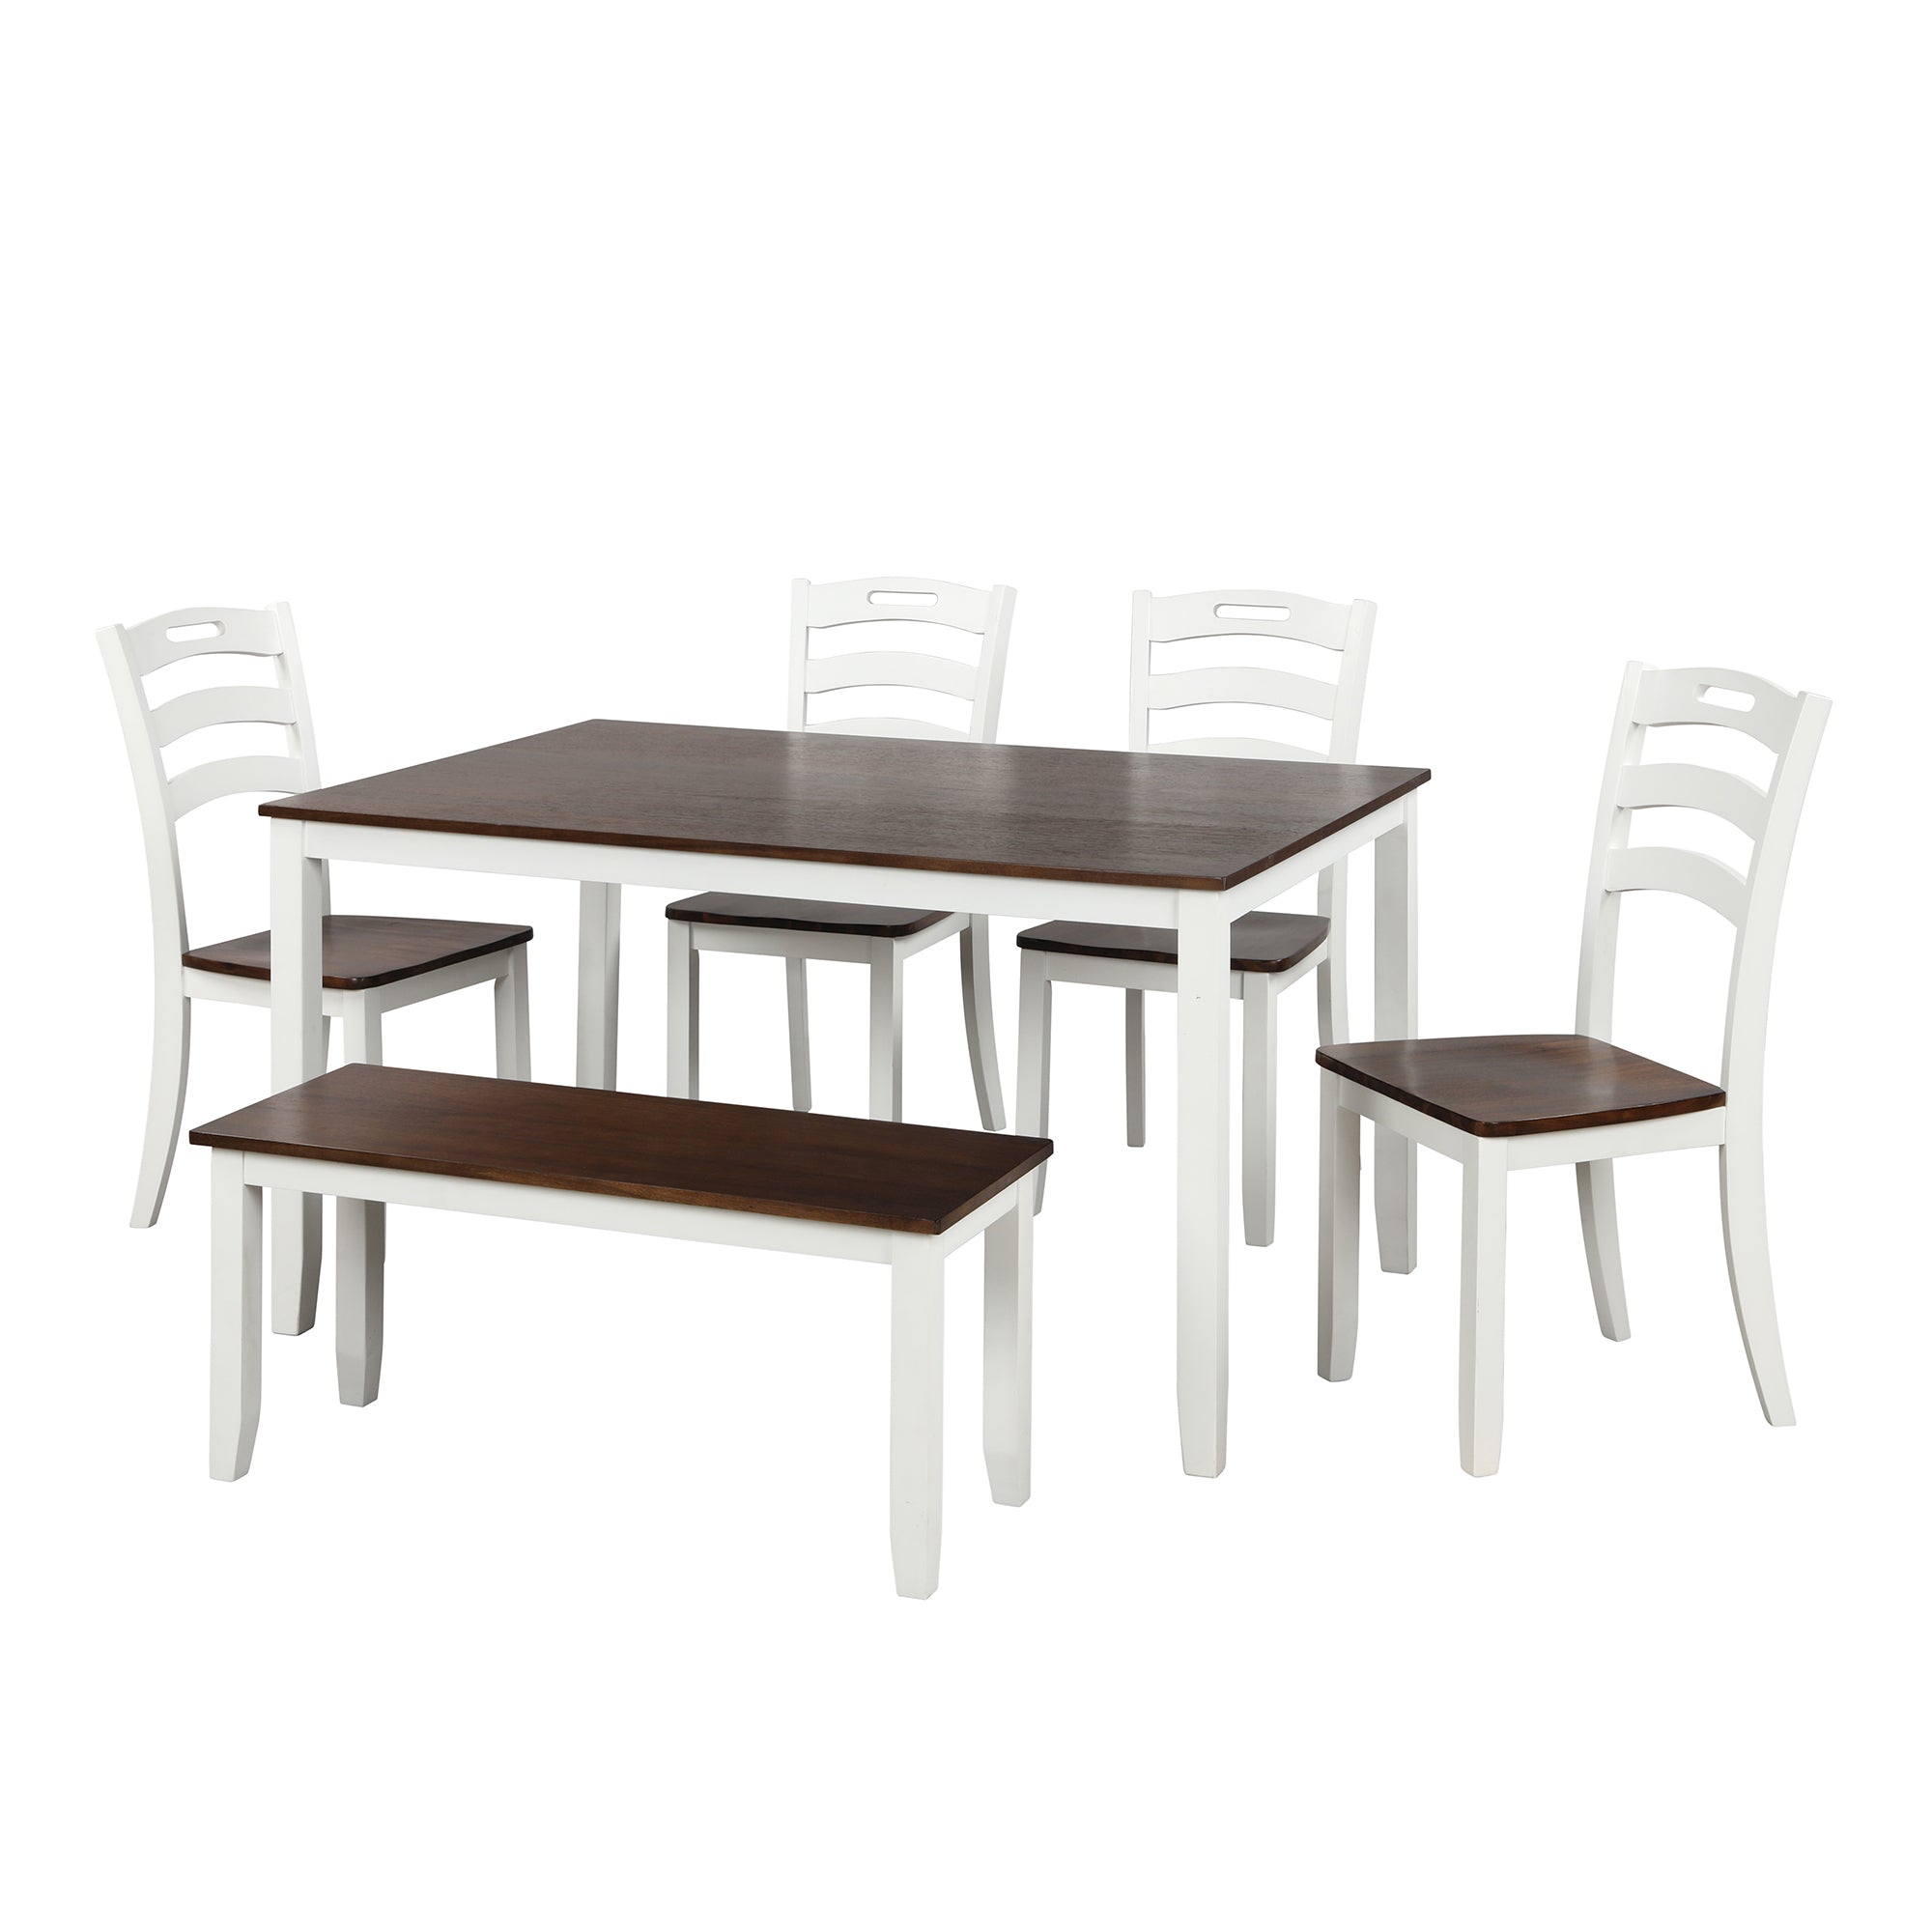 TOPMAX 6 Piece Dining Table Set with Bench, Table Set with Waterproof Coat (Ivory)